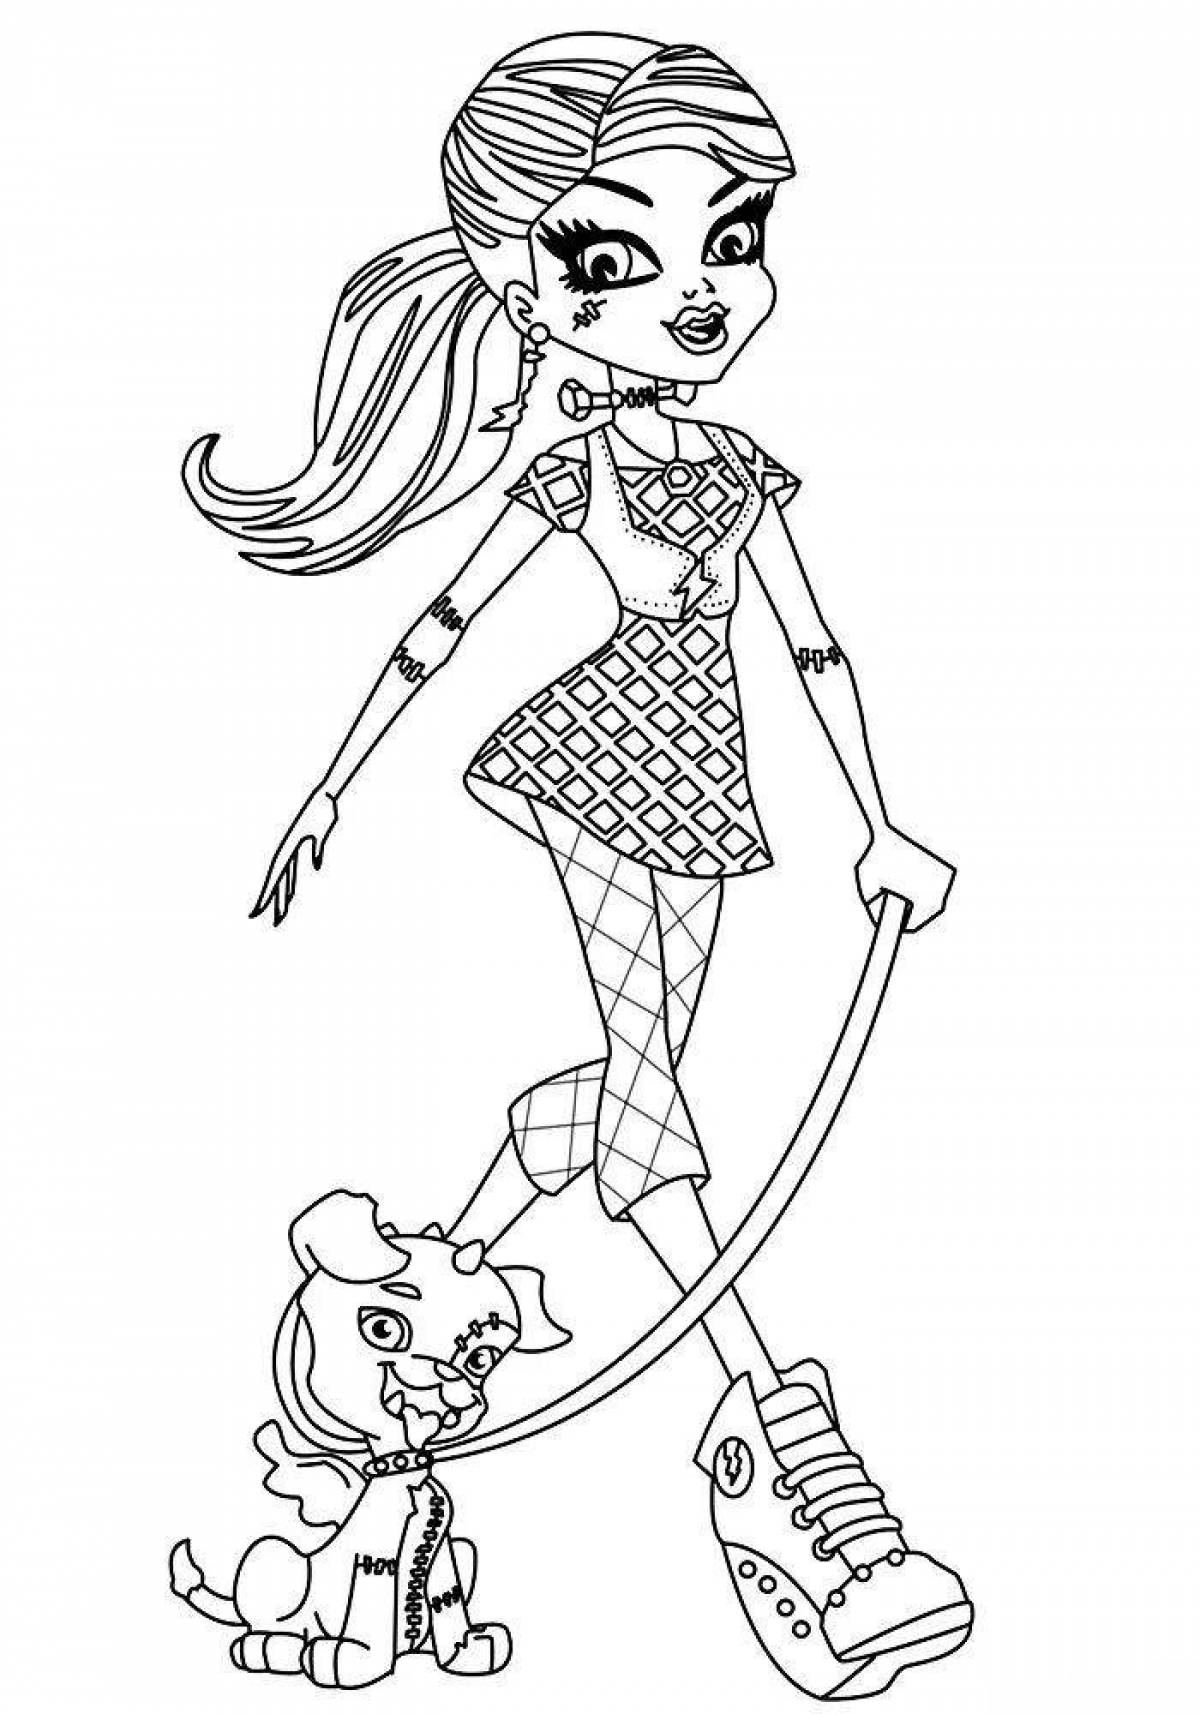 Delightful coloring monster high